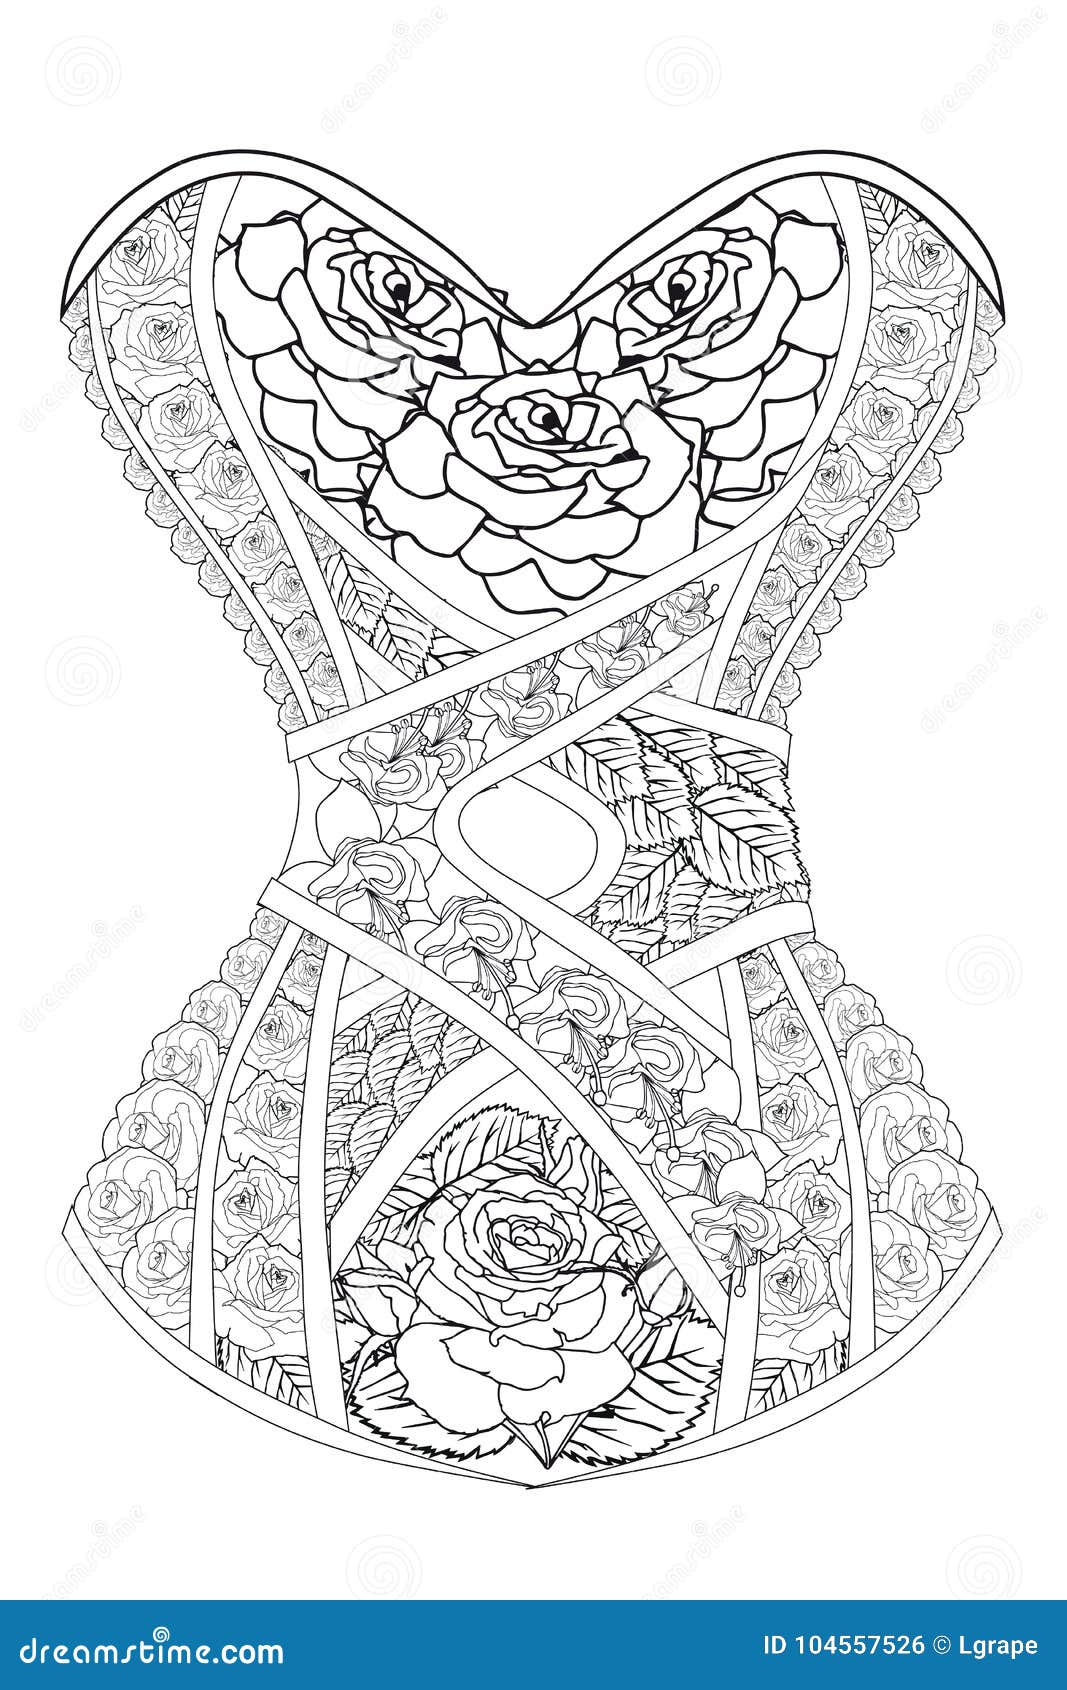 Coloring Page For Adults. Corset With Roses. Stock Vector ...